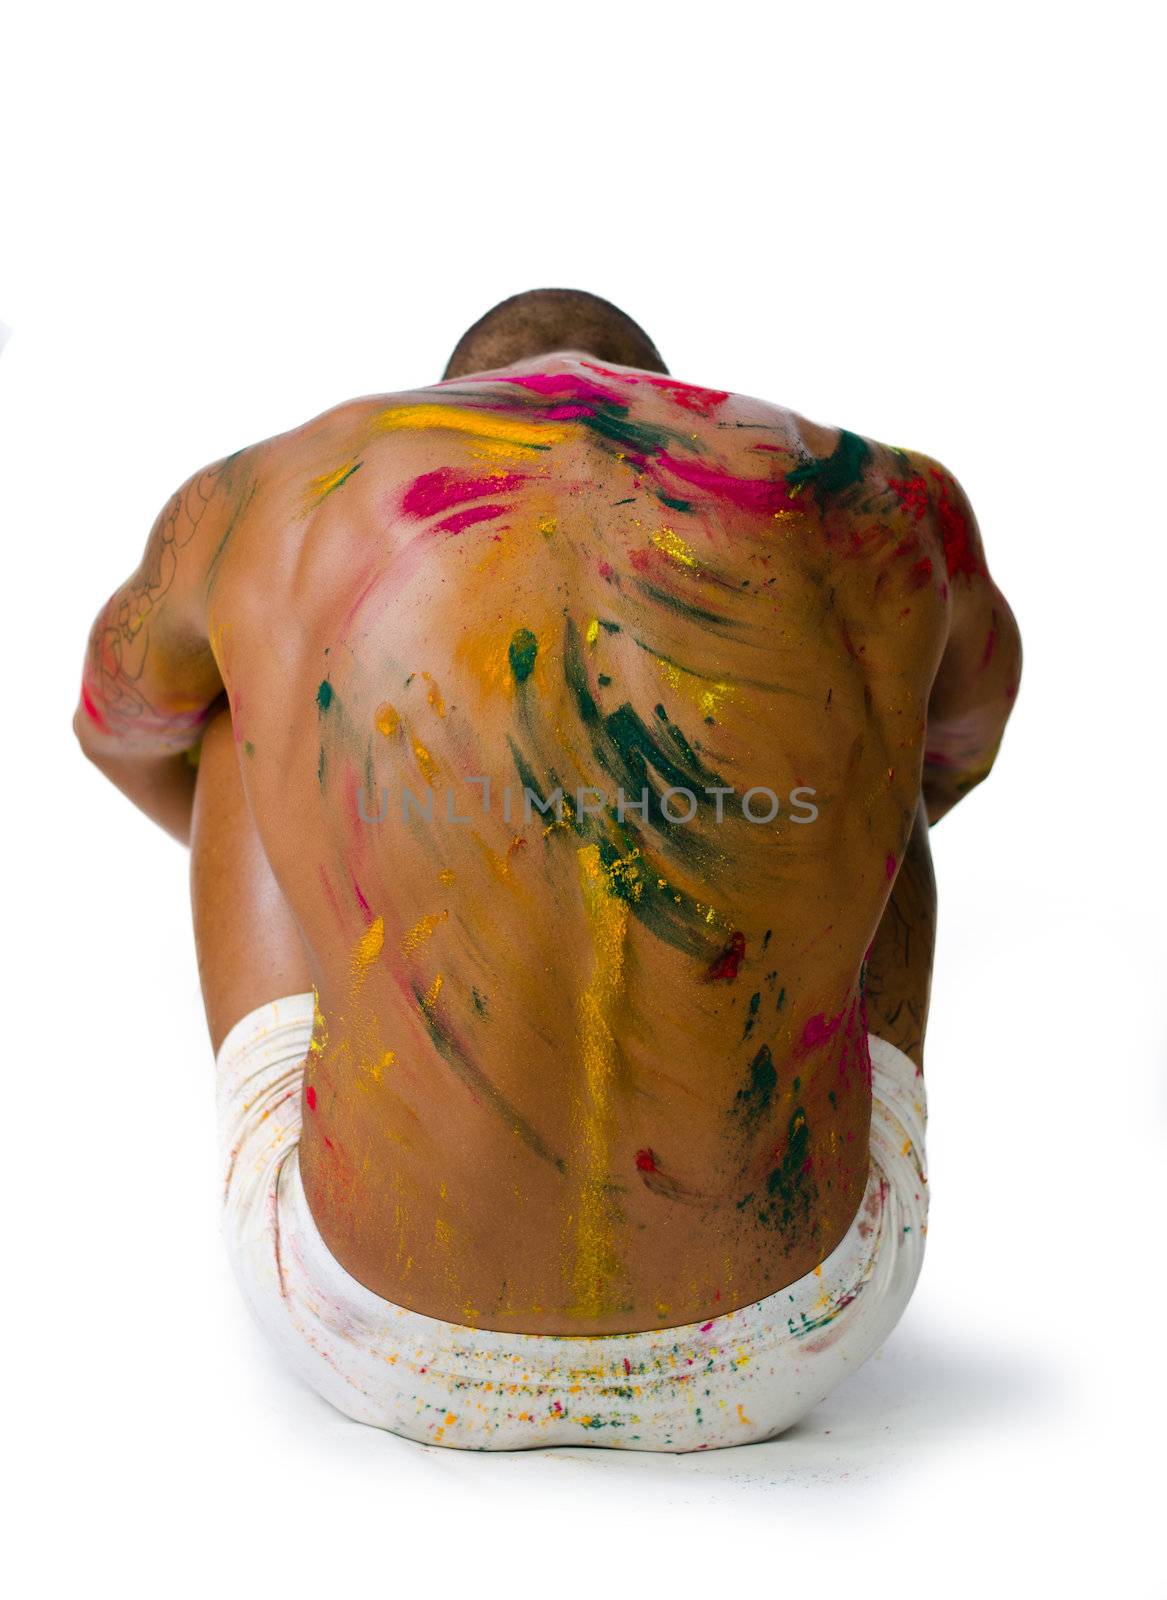 Muscular back of shirtless young man with skin painted all over with bright colors by artofphoto